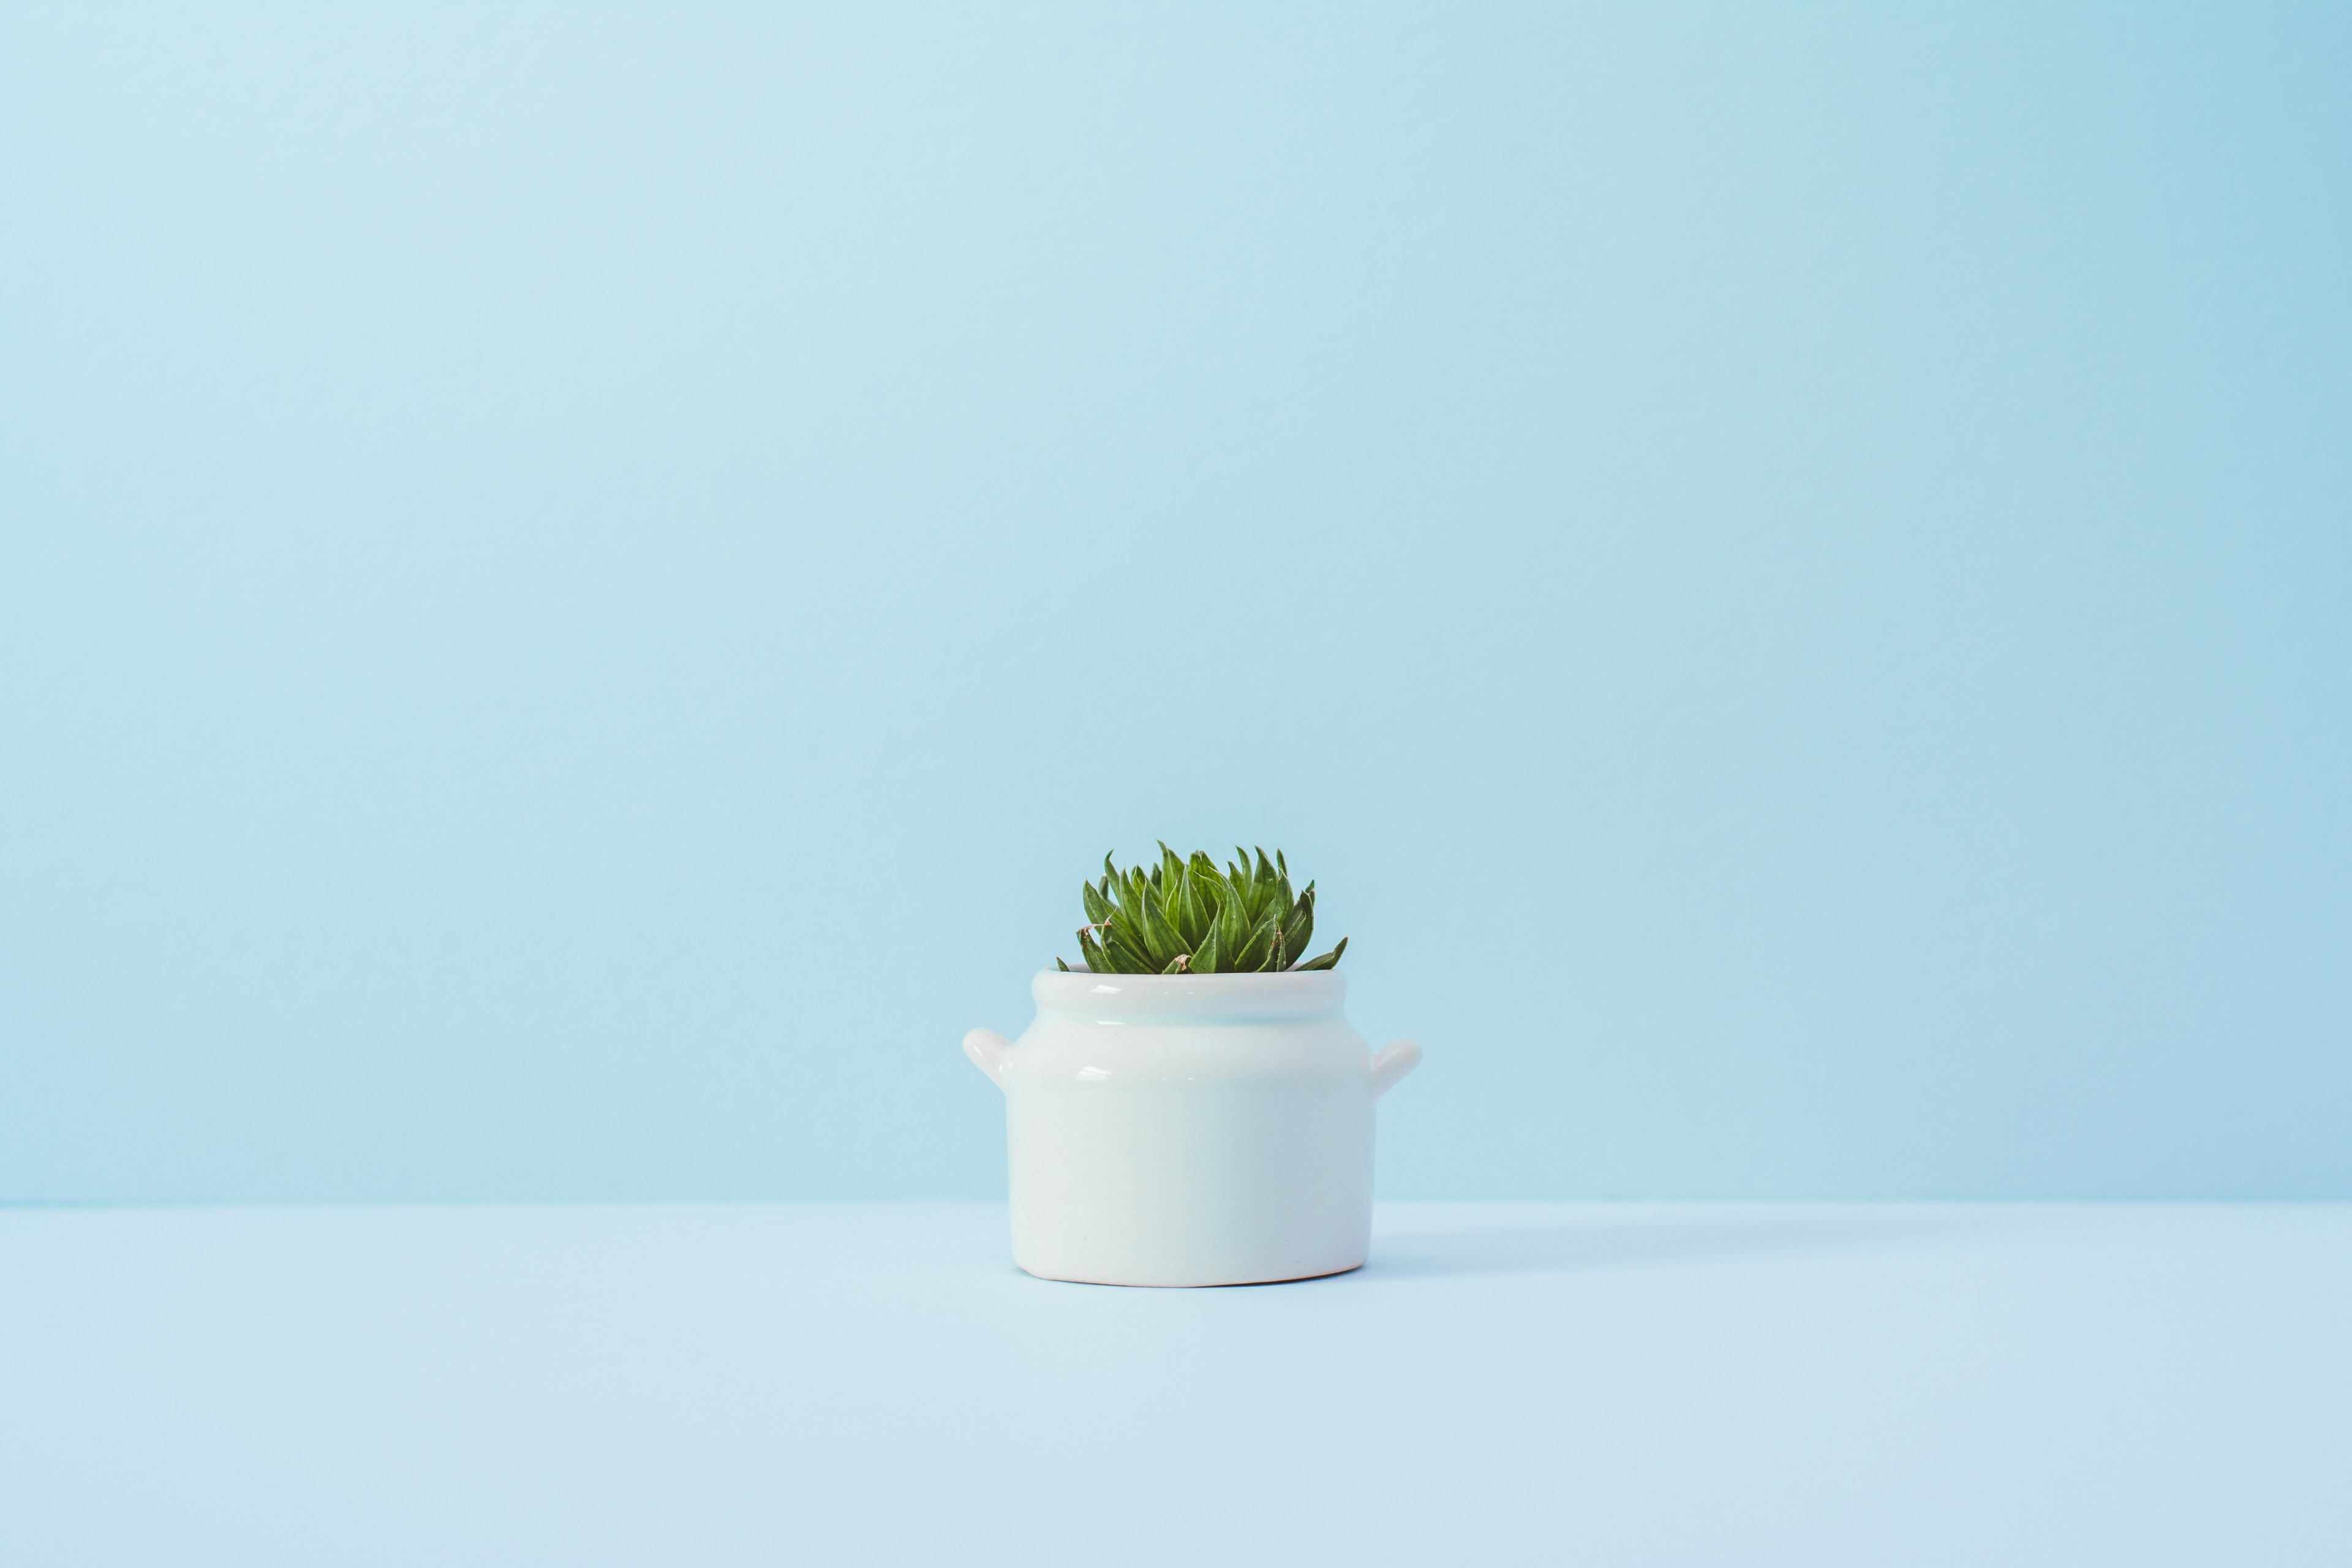 Wallpaper / a succulent in a white ceramic pot against a blue wall, the minimalist 4k wallpaper free download